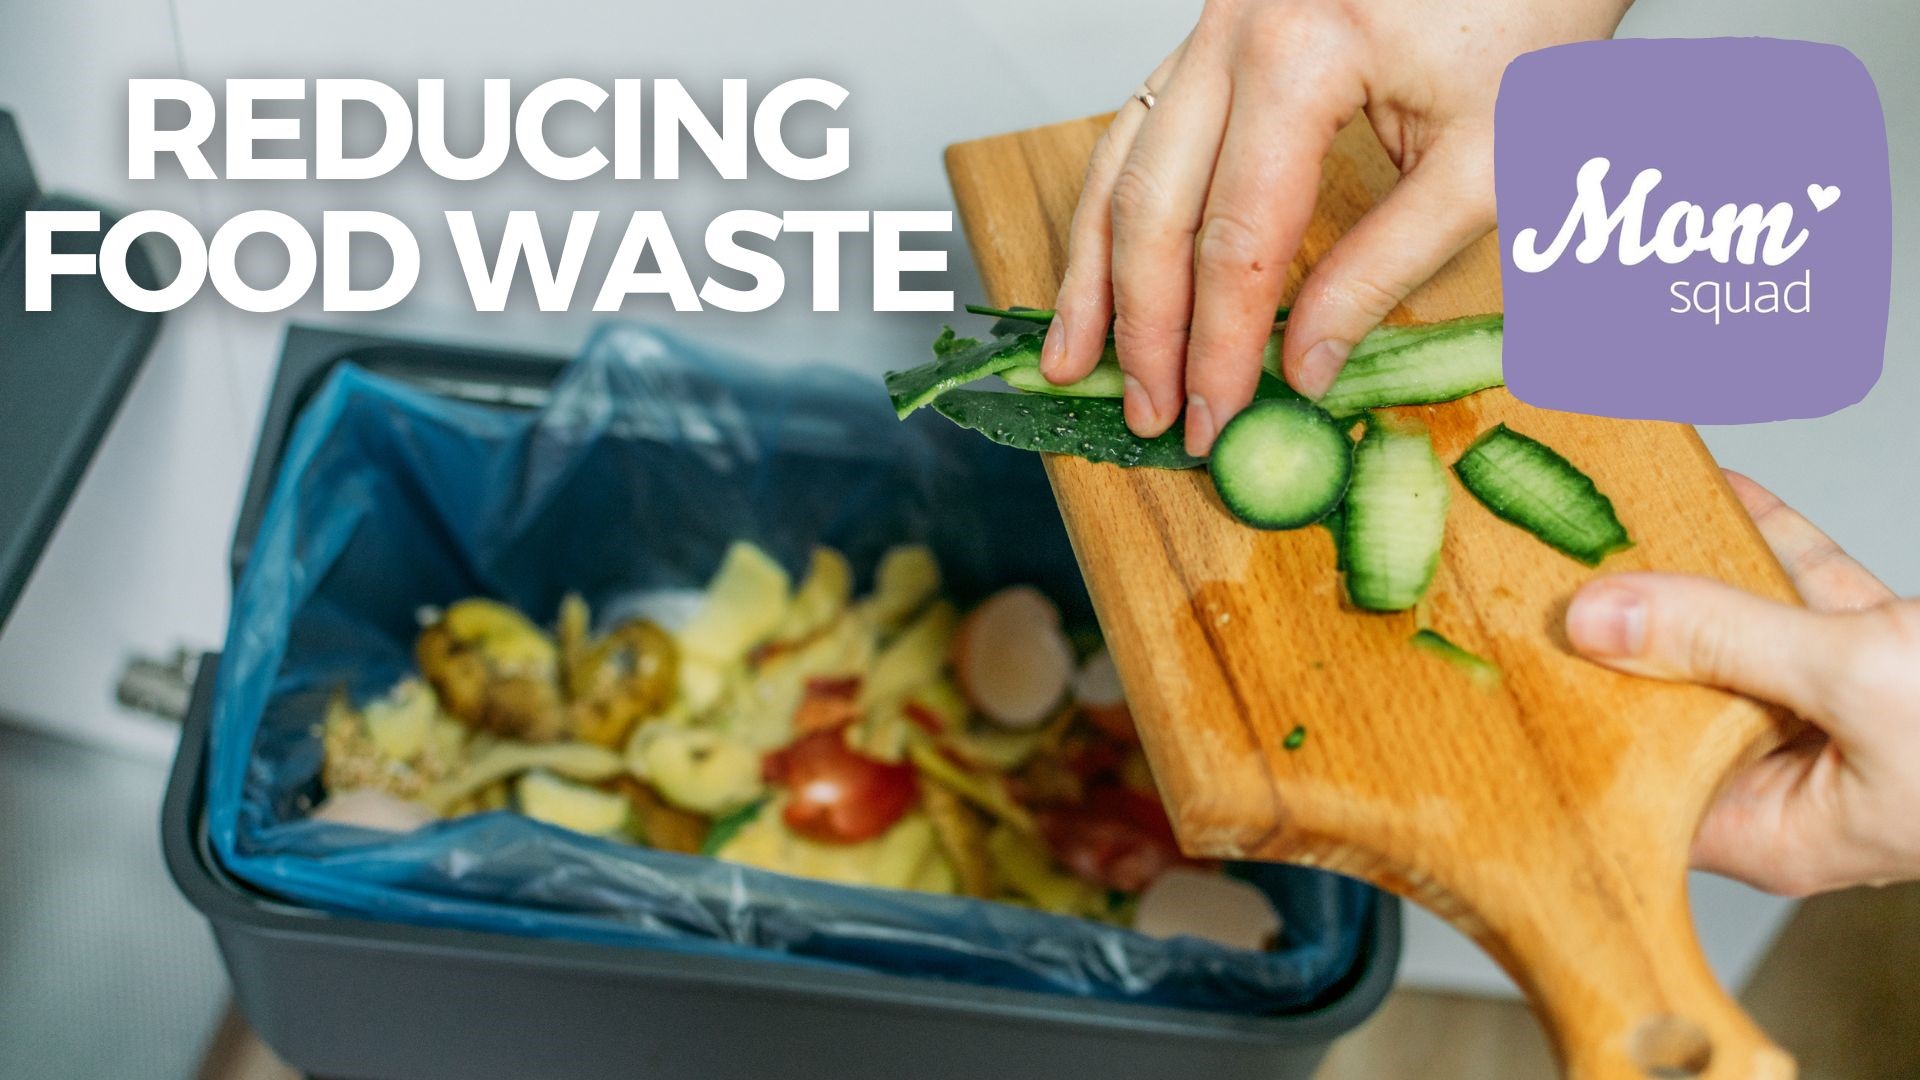 Maureen Kyle talks with a shopping expert on ways you can avoid wasting food and money on groceries. Plus tips on composting and reducing your food waste.